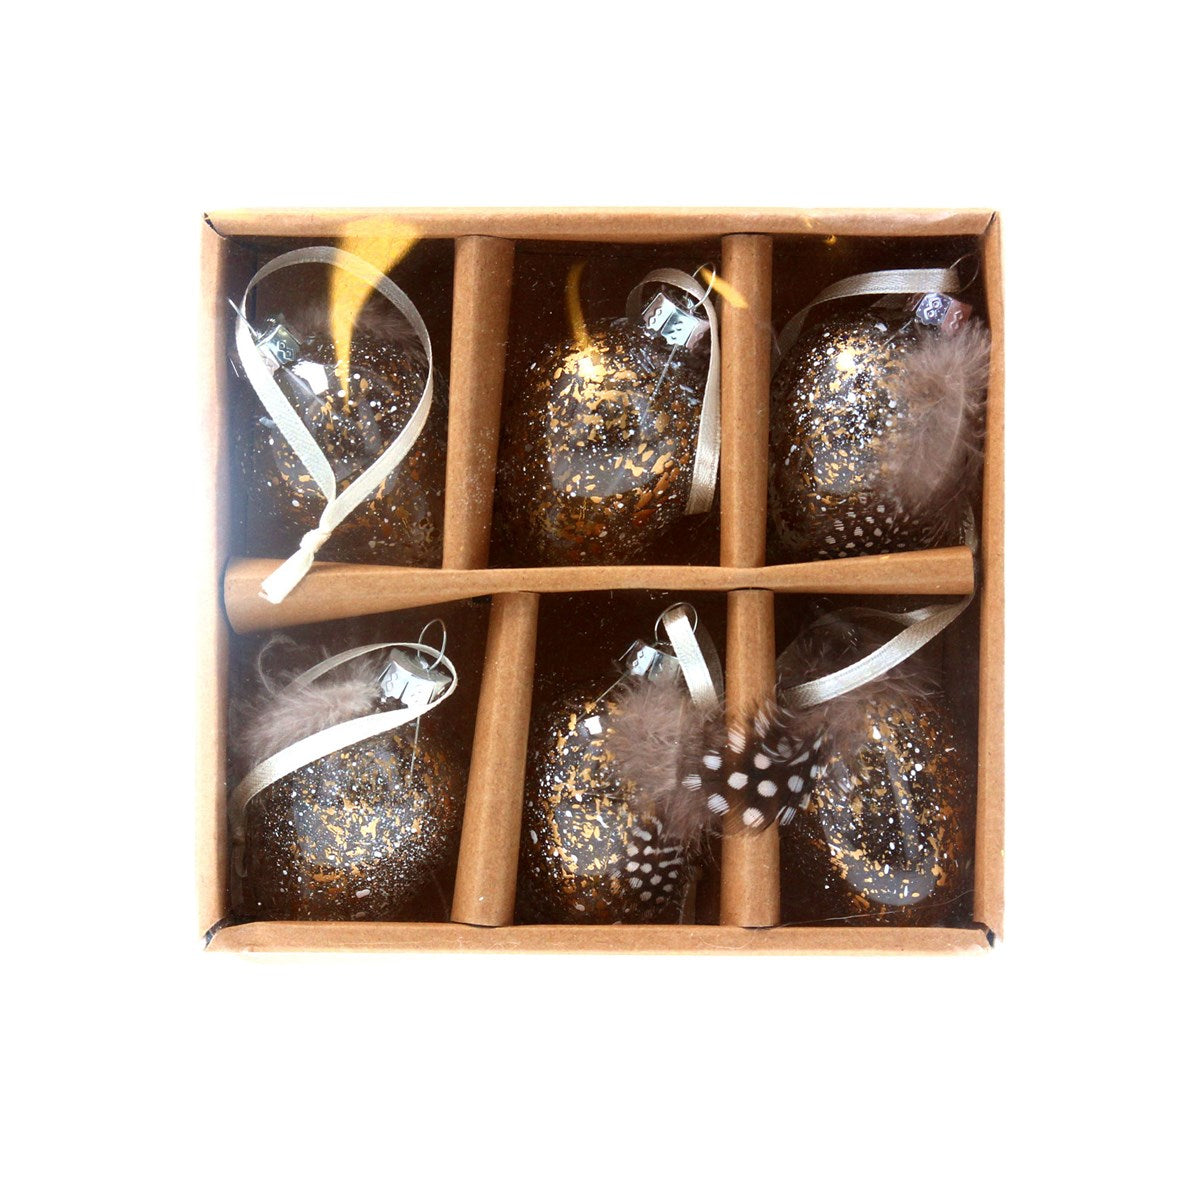 Box of glass gold speckled eggs